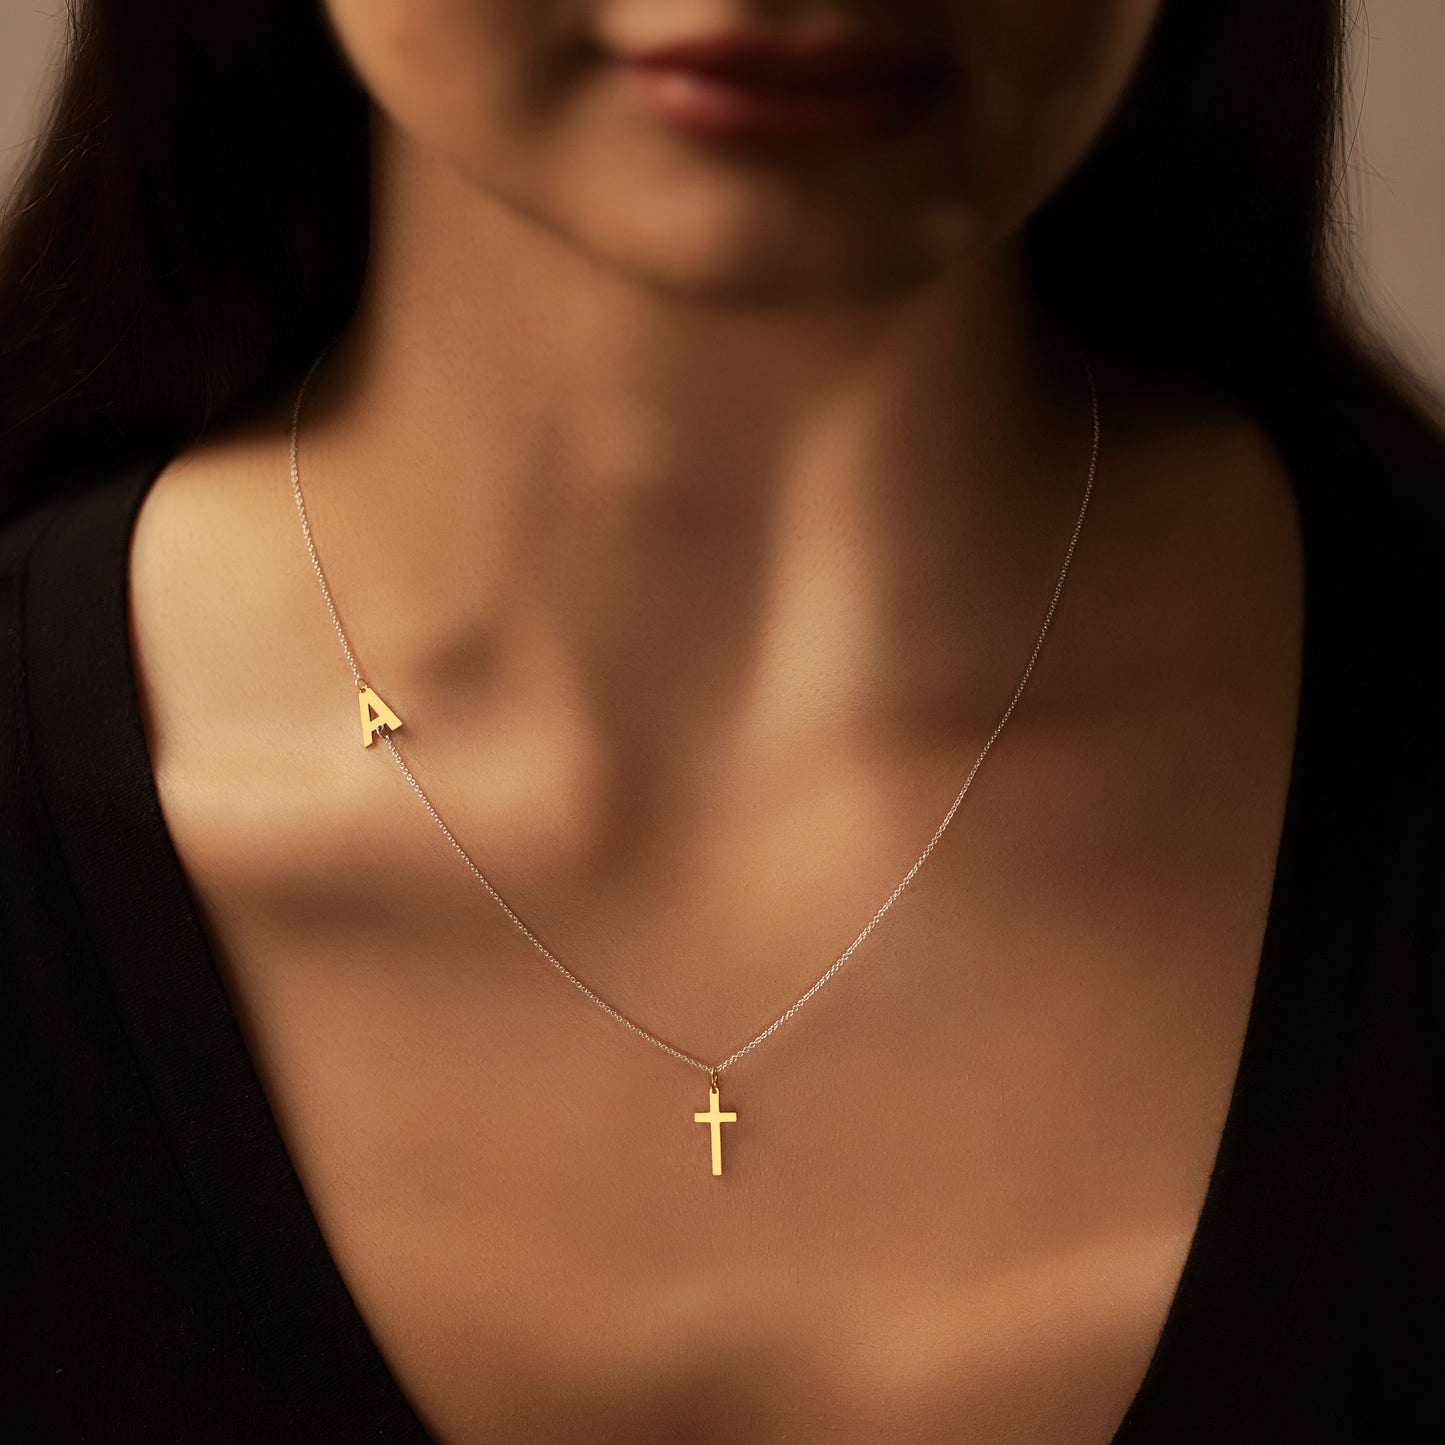 Sideway Initial Necklace